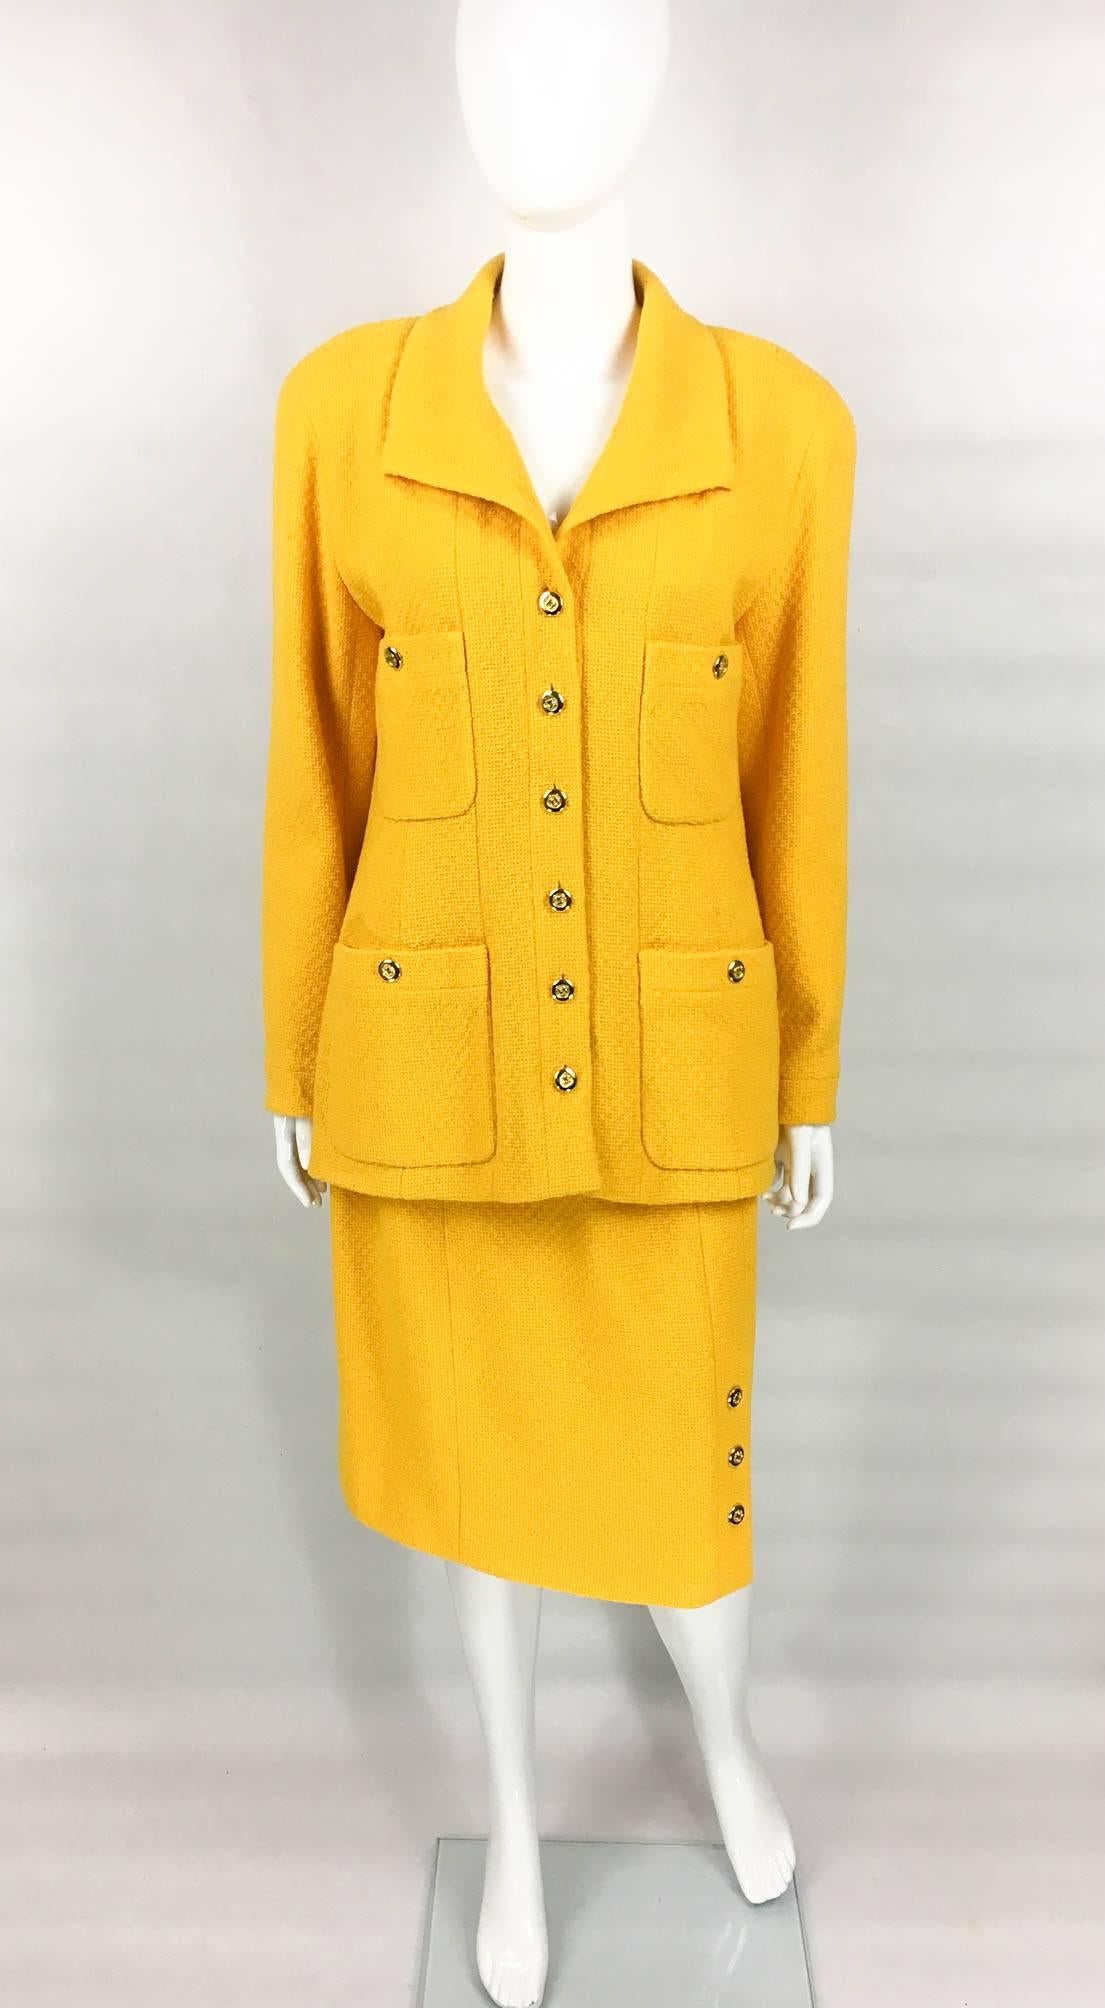 Striking Vintage Chanel Wool Skirt Suit. This wonderful ensemble by Chanel dates back from the early 1980s. Made in a beautiful tone of golden yellow wool bouclé, this suit is certain to steal the spotlight. The jacket features four front pockets